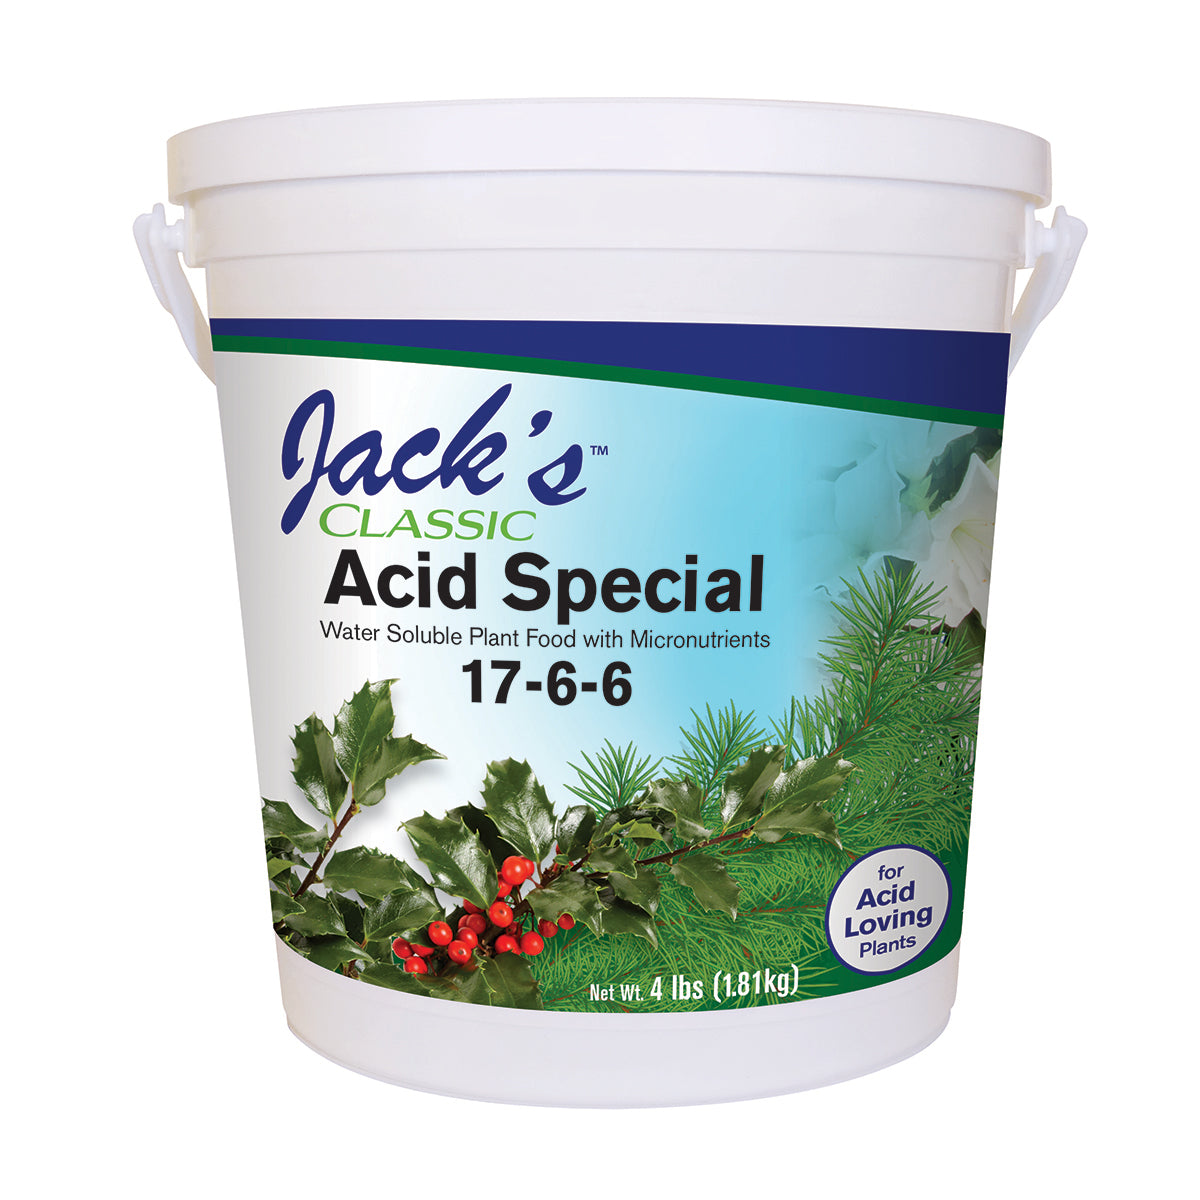 Product Secondary Image:Jack's Classic Acid Special 17-6-6